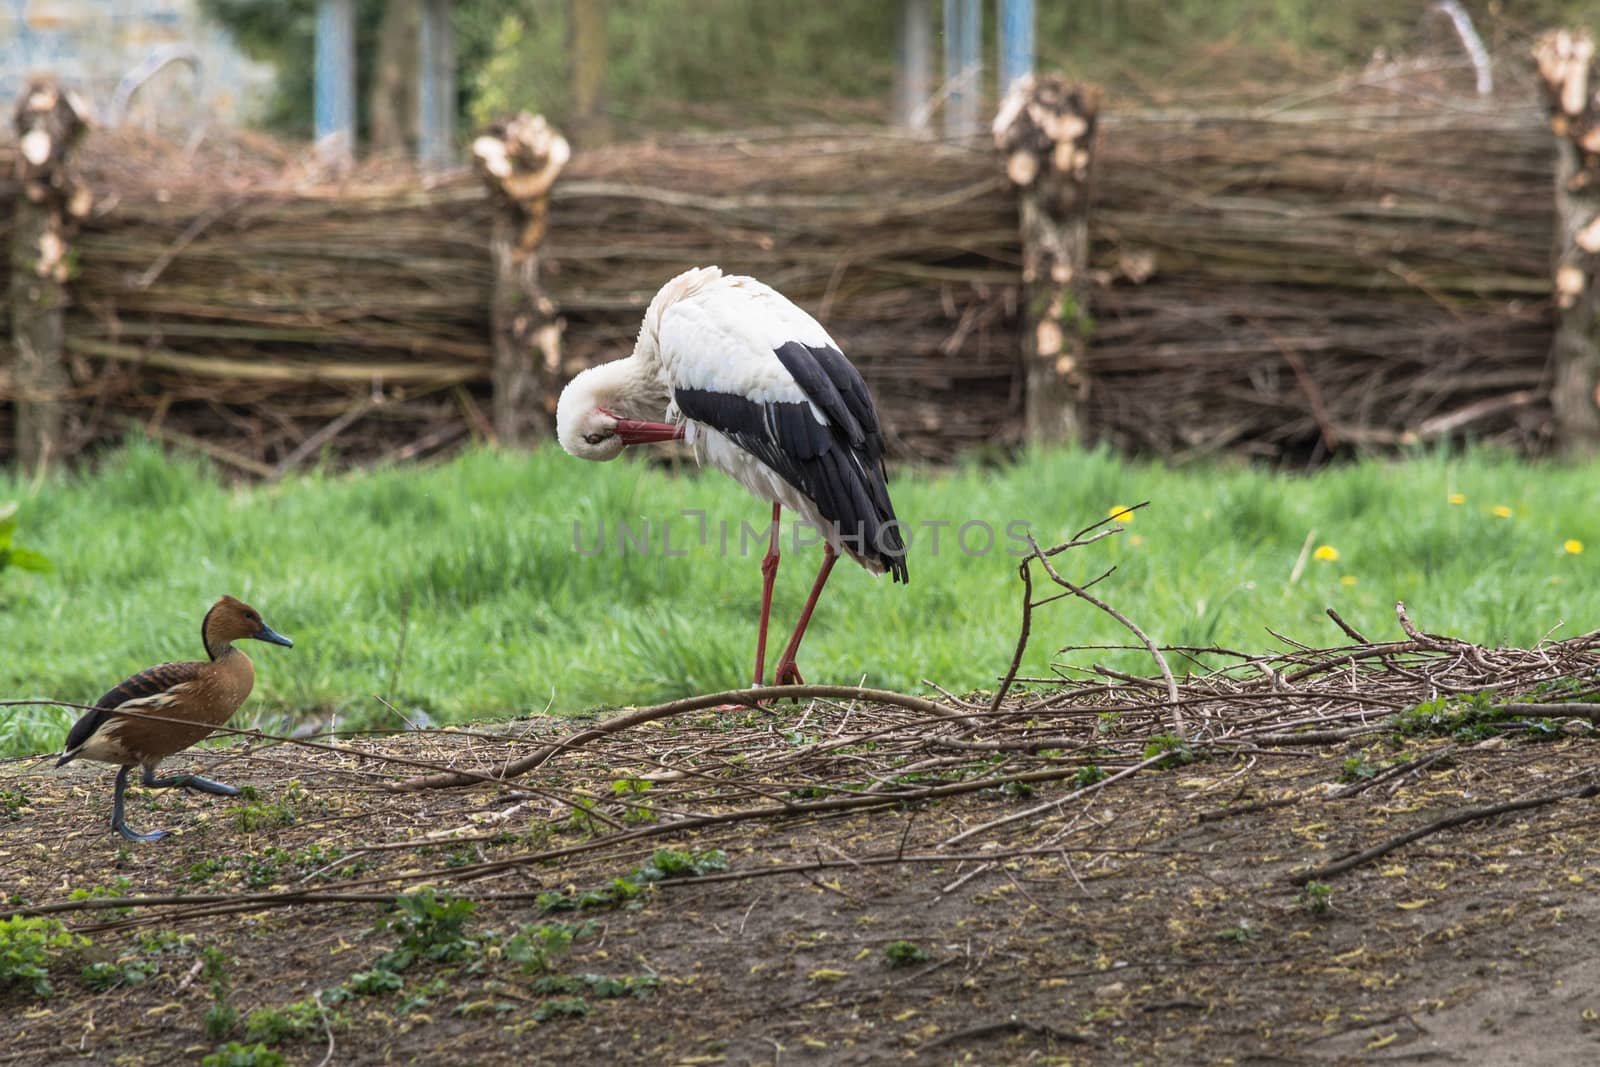 Adult Stork in nature by JFsPic